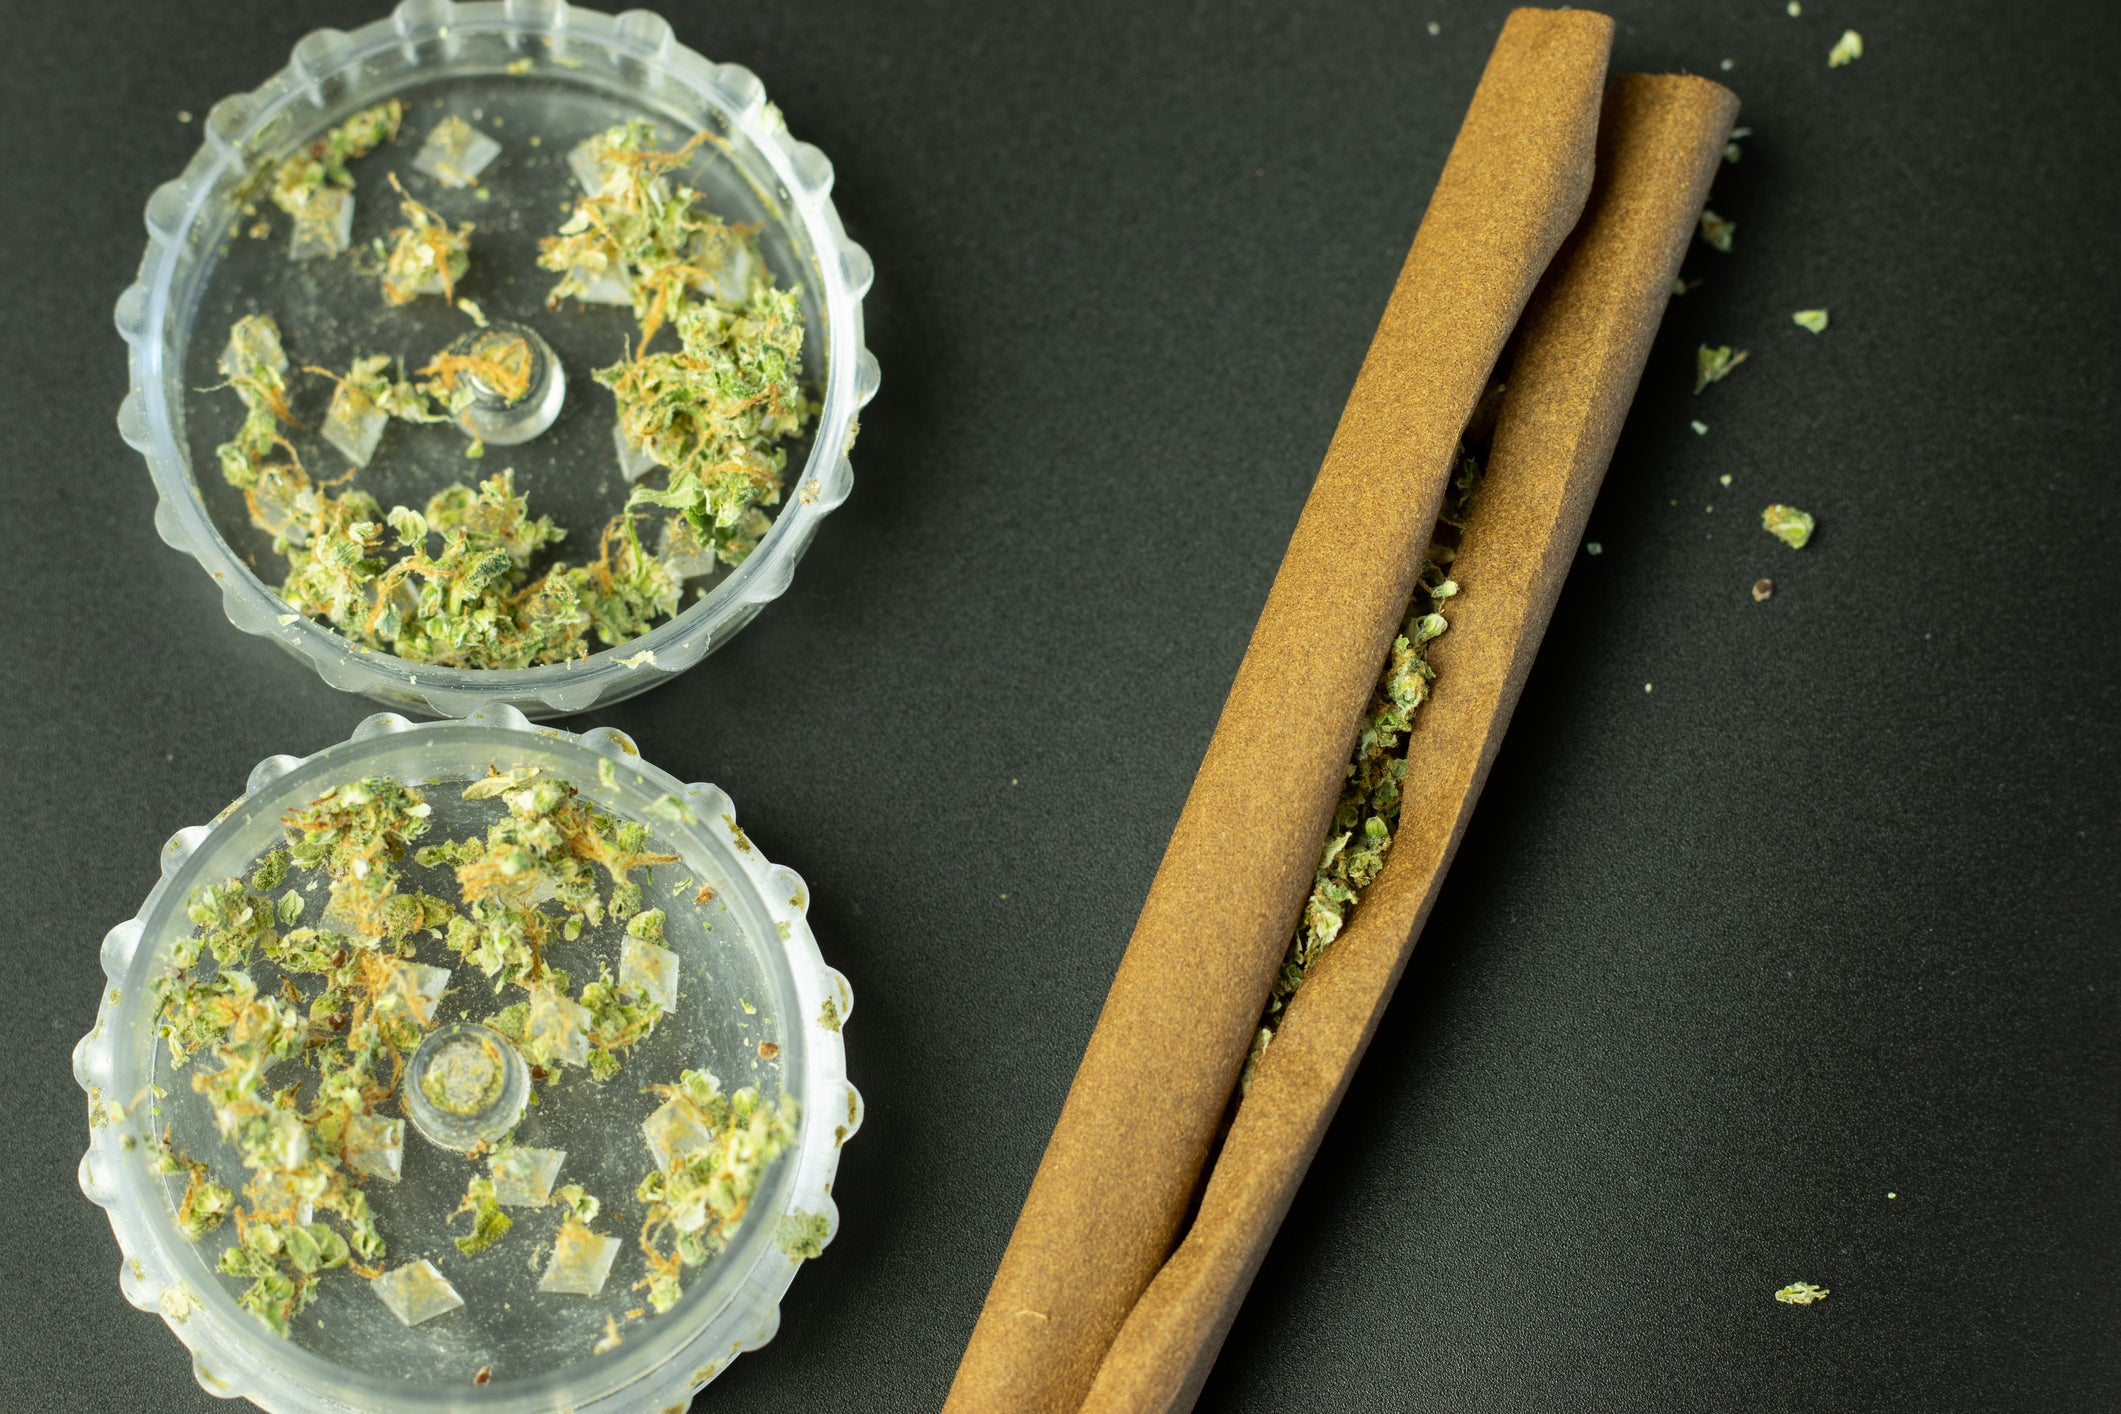 A blunt being rolled with cannabis flower lies next to the grinder.